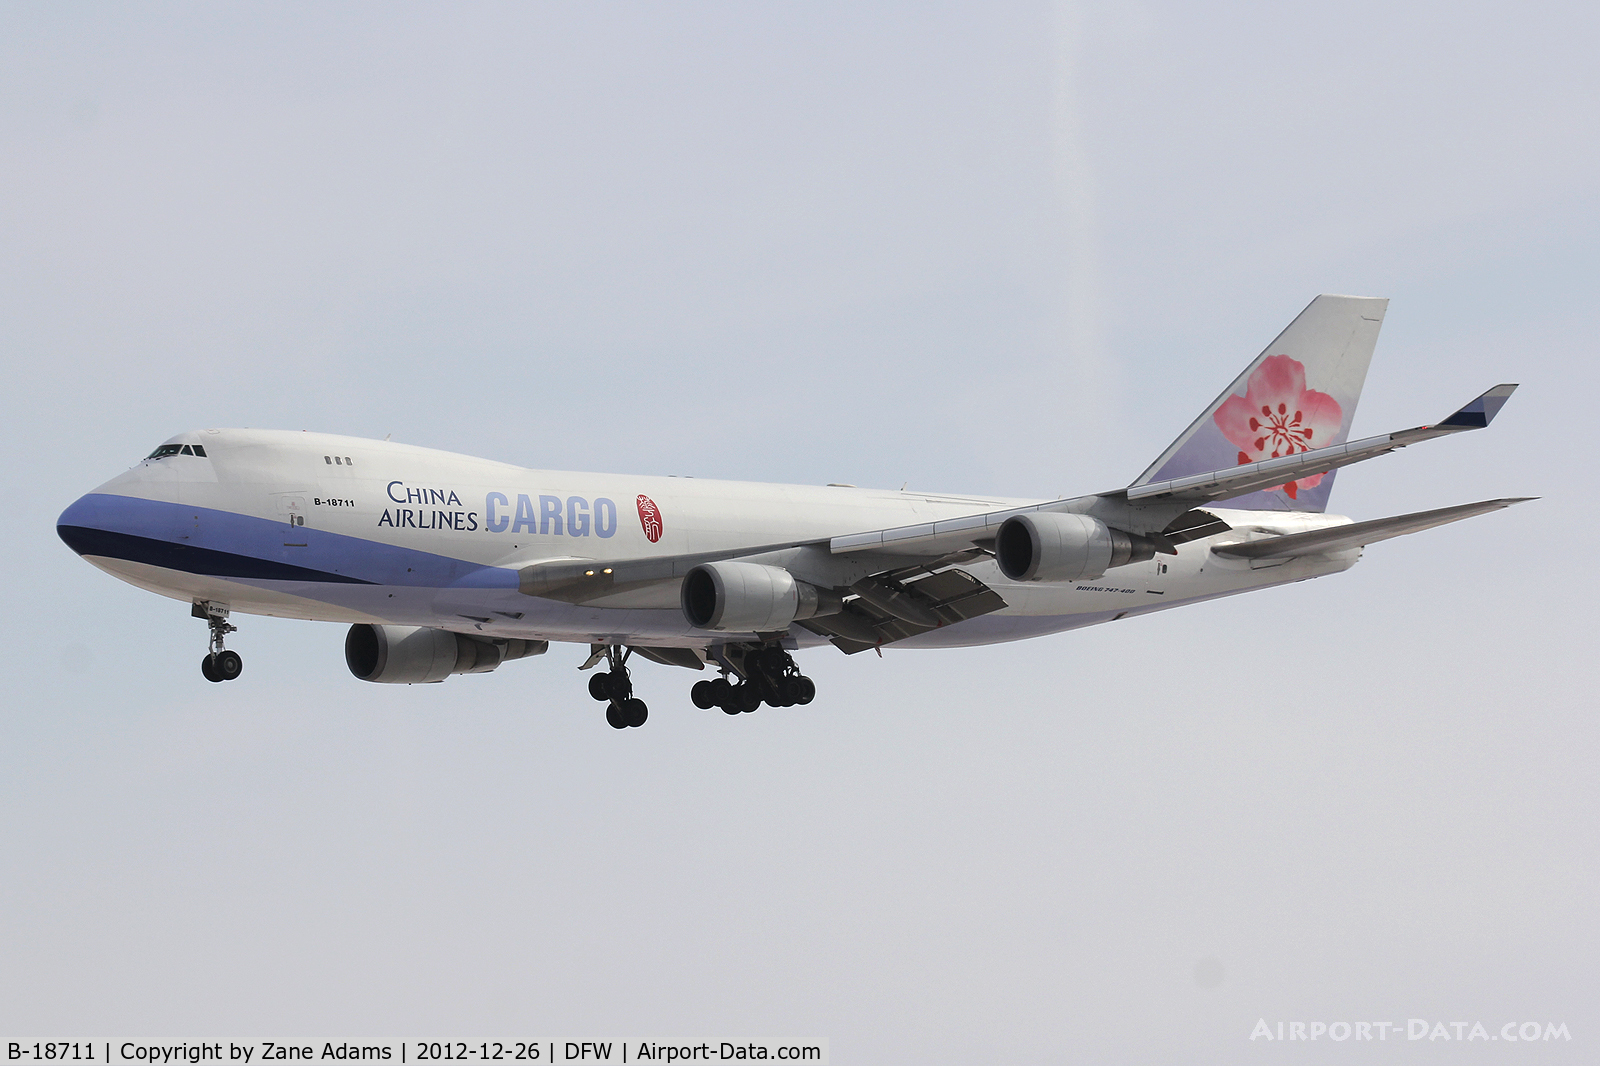 B-18711, 2002 Boeing 747-409F/SCD C/N 30768, China Airlines Cargo 747 at DFW Airport